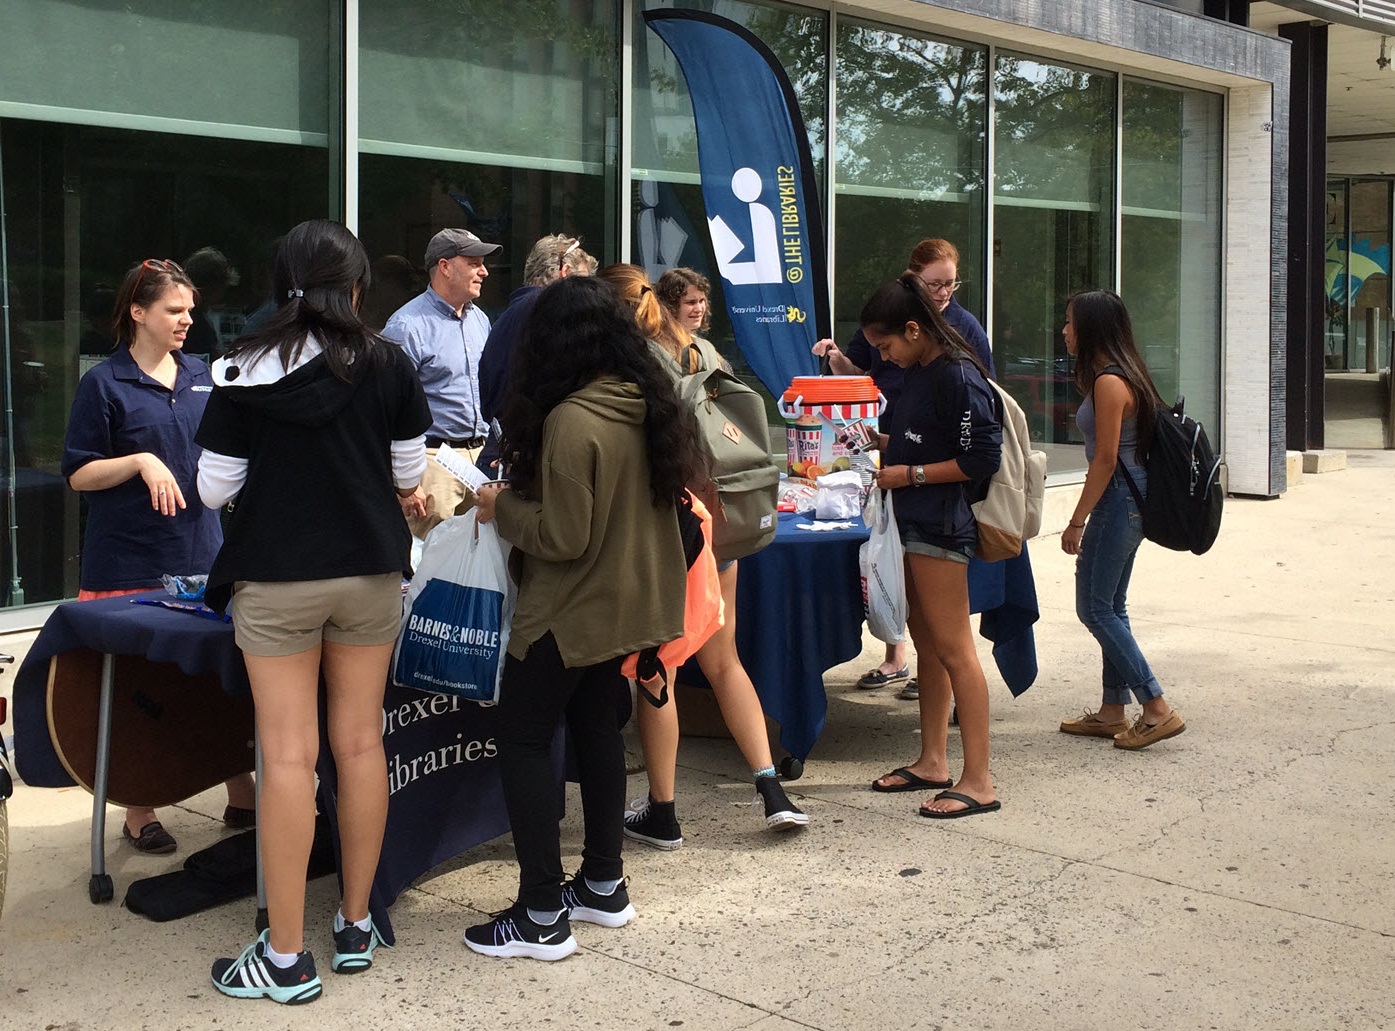 Drexel students wait in line for water ice in front of the Library Learning Terrace